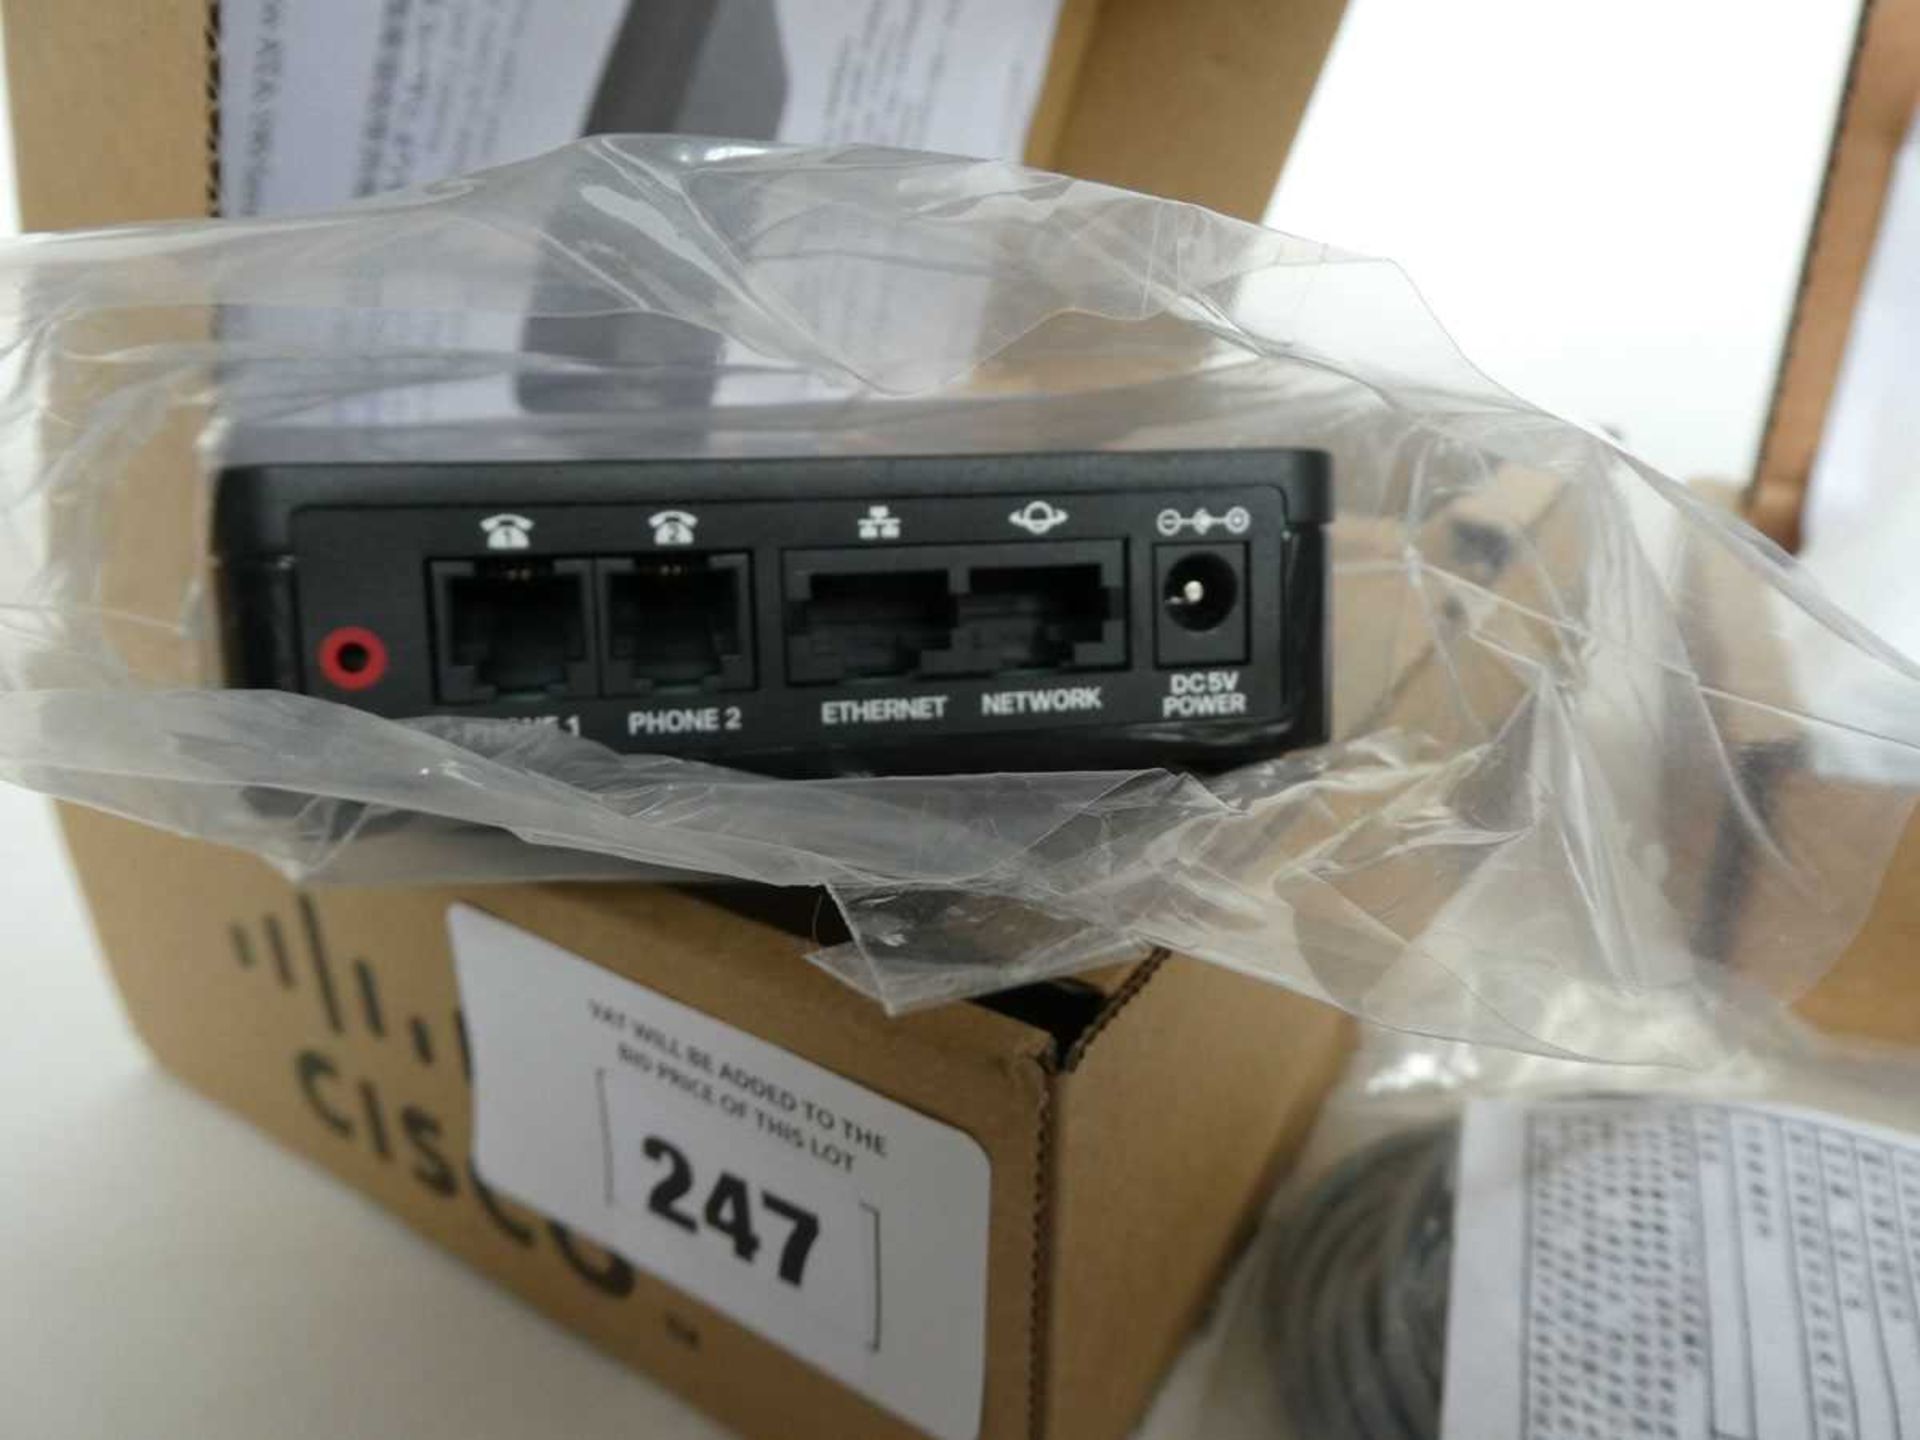 +VAT 3x Cisco items including 1 ATA 190 Series analogue telephone adapter with power supply, 1 Cisco - Image 2 of 4